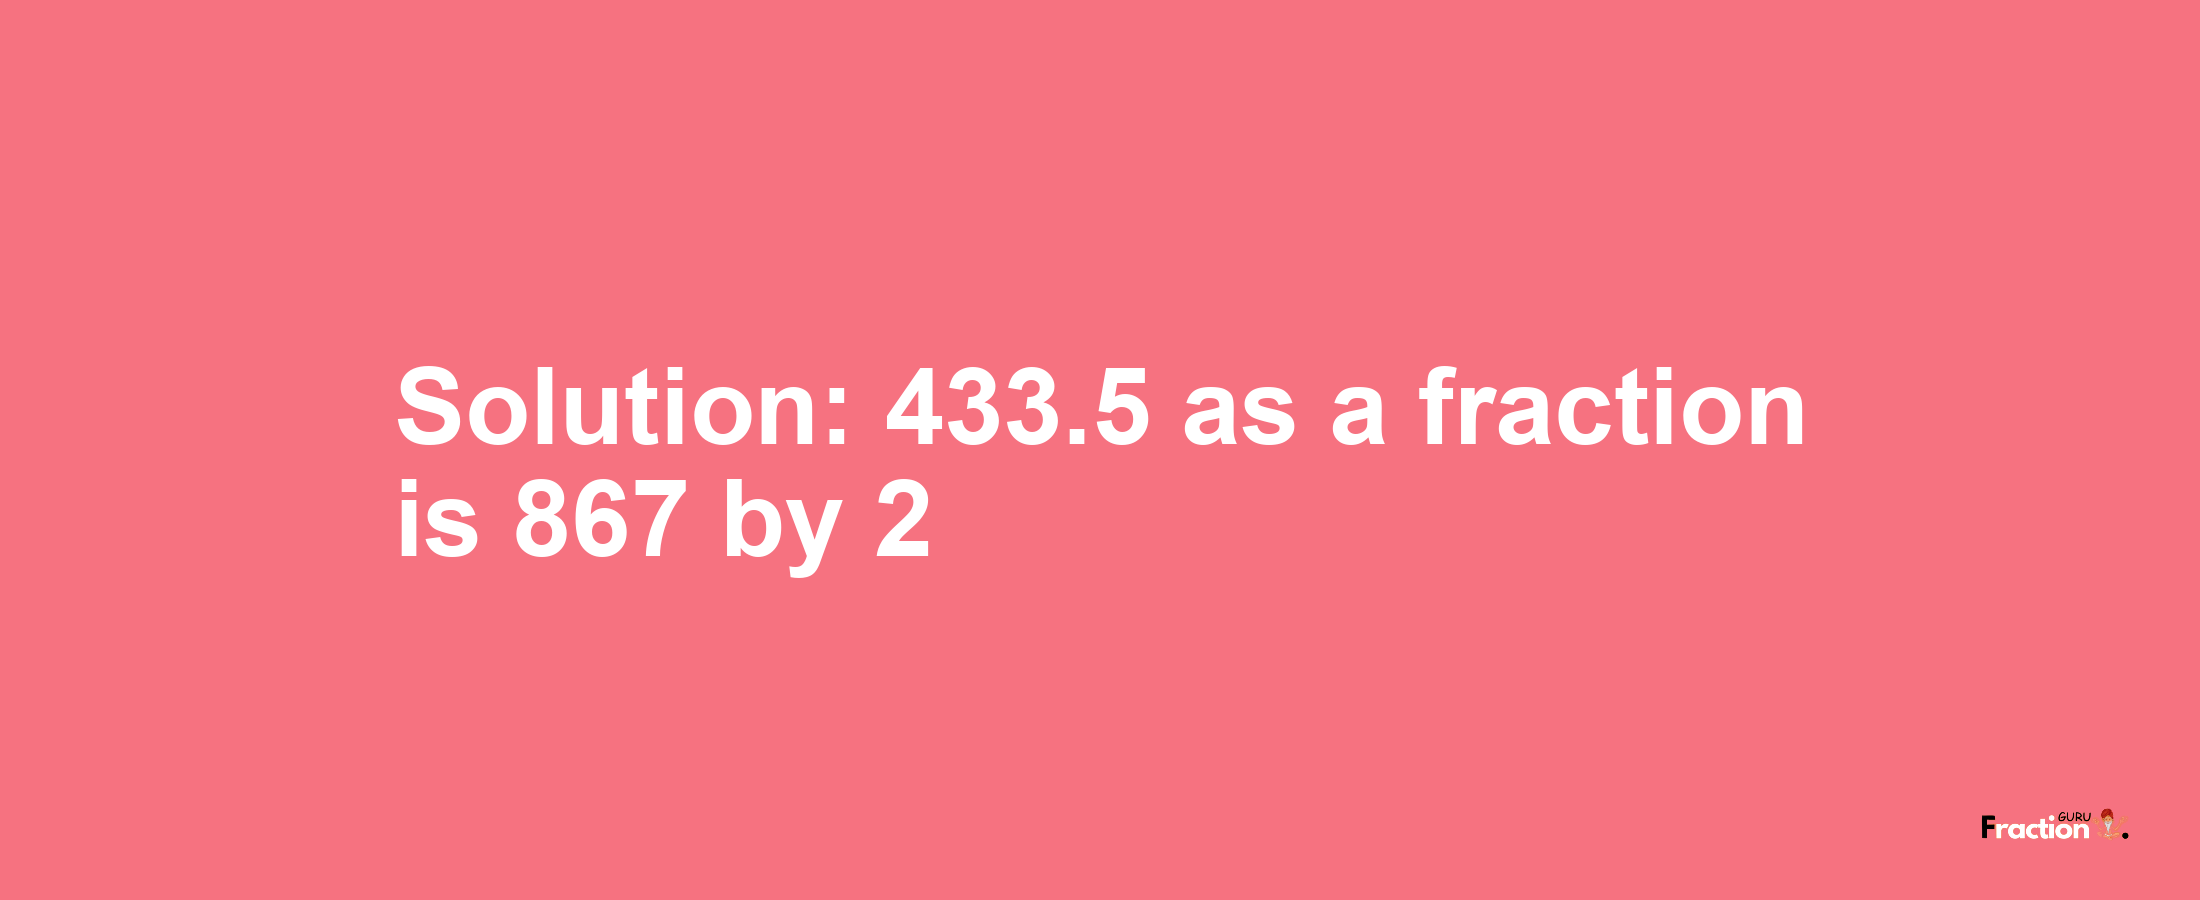 Solution:433.5 as a fraction is 867/2